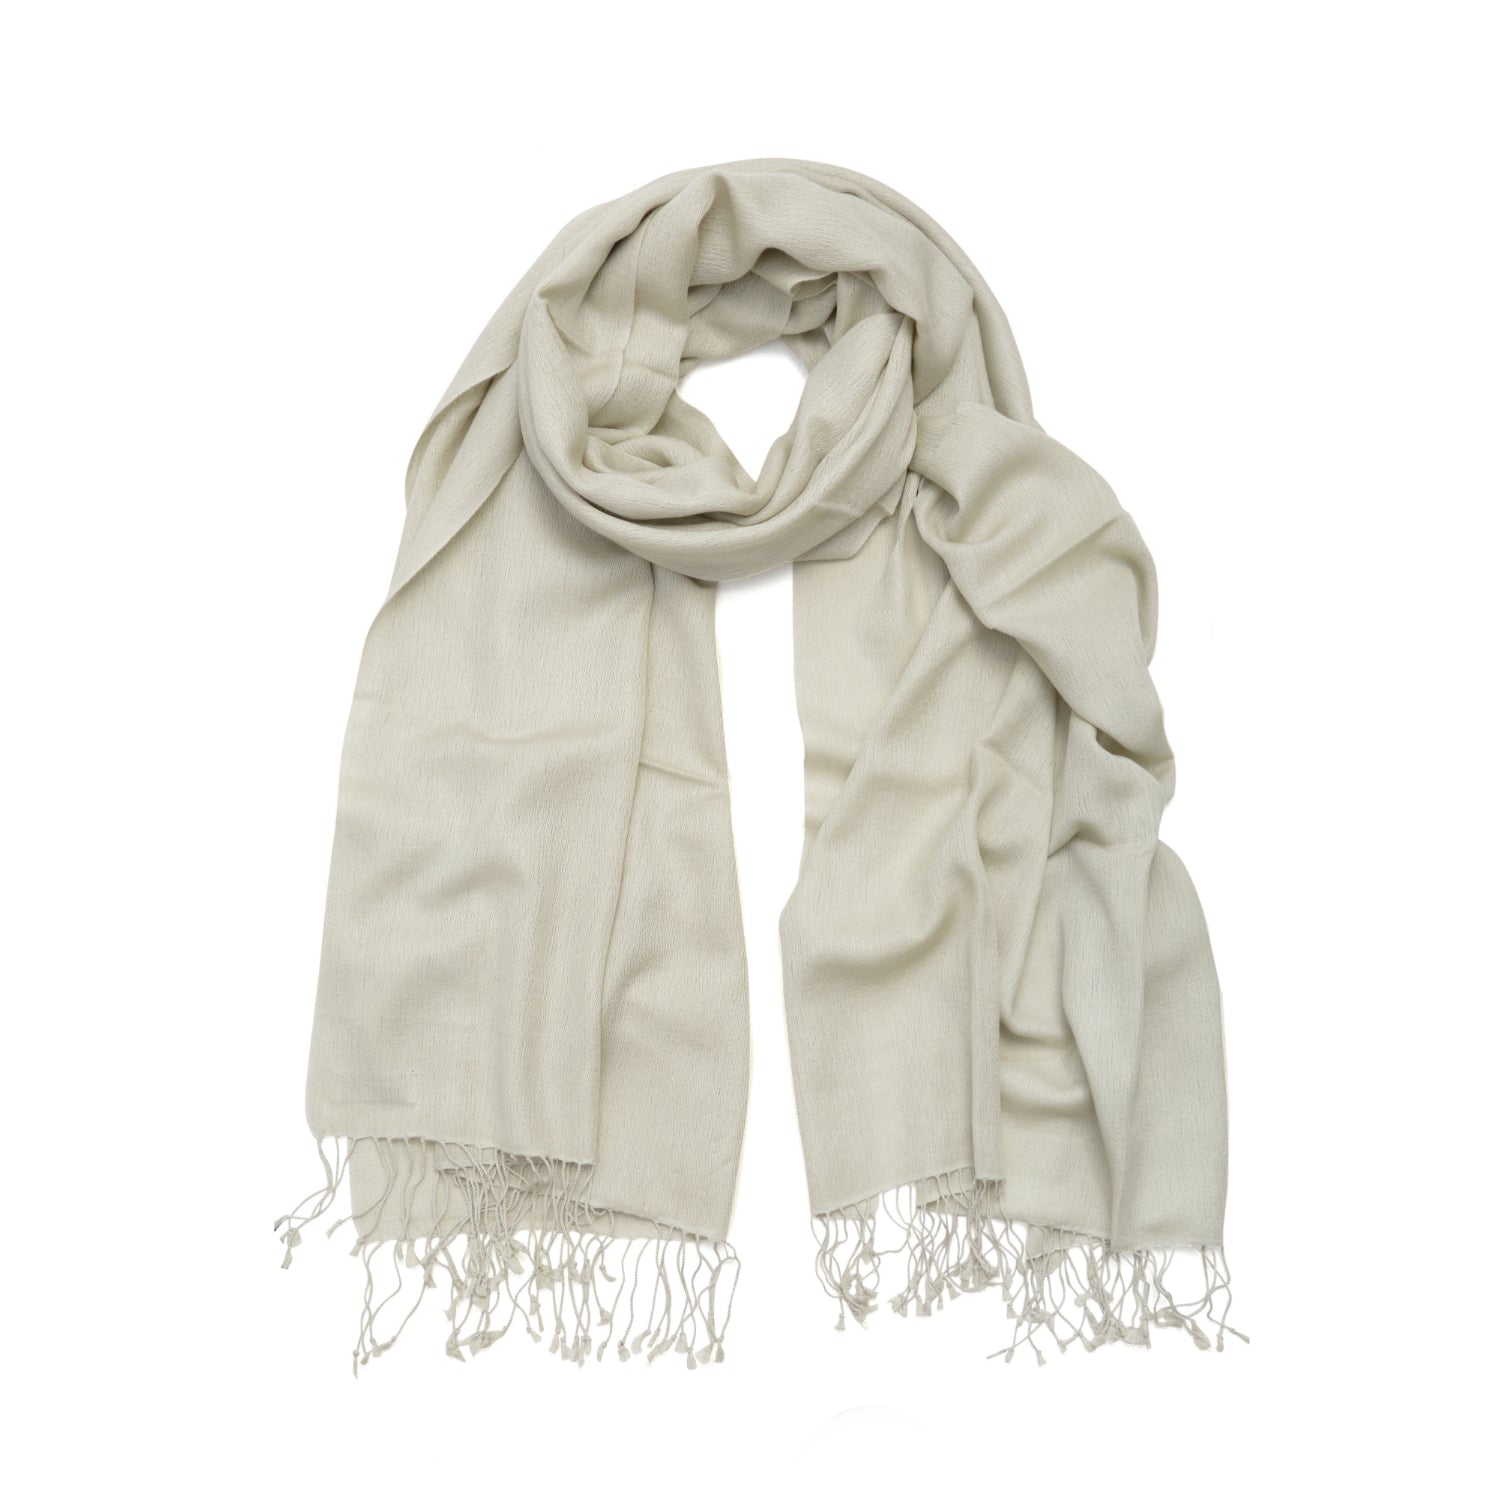 Buy Ladies Beige Latte Pashmina Stole | Shawl | Wrap from The Cashmere Choice | London